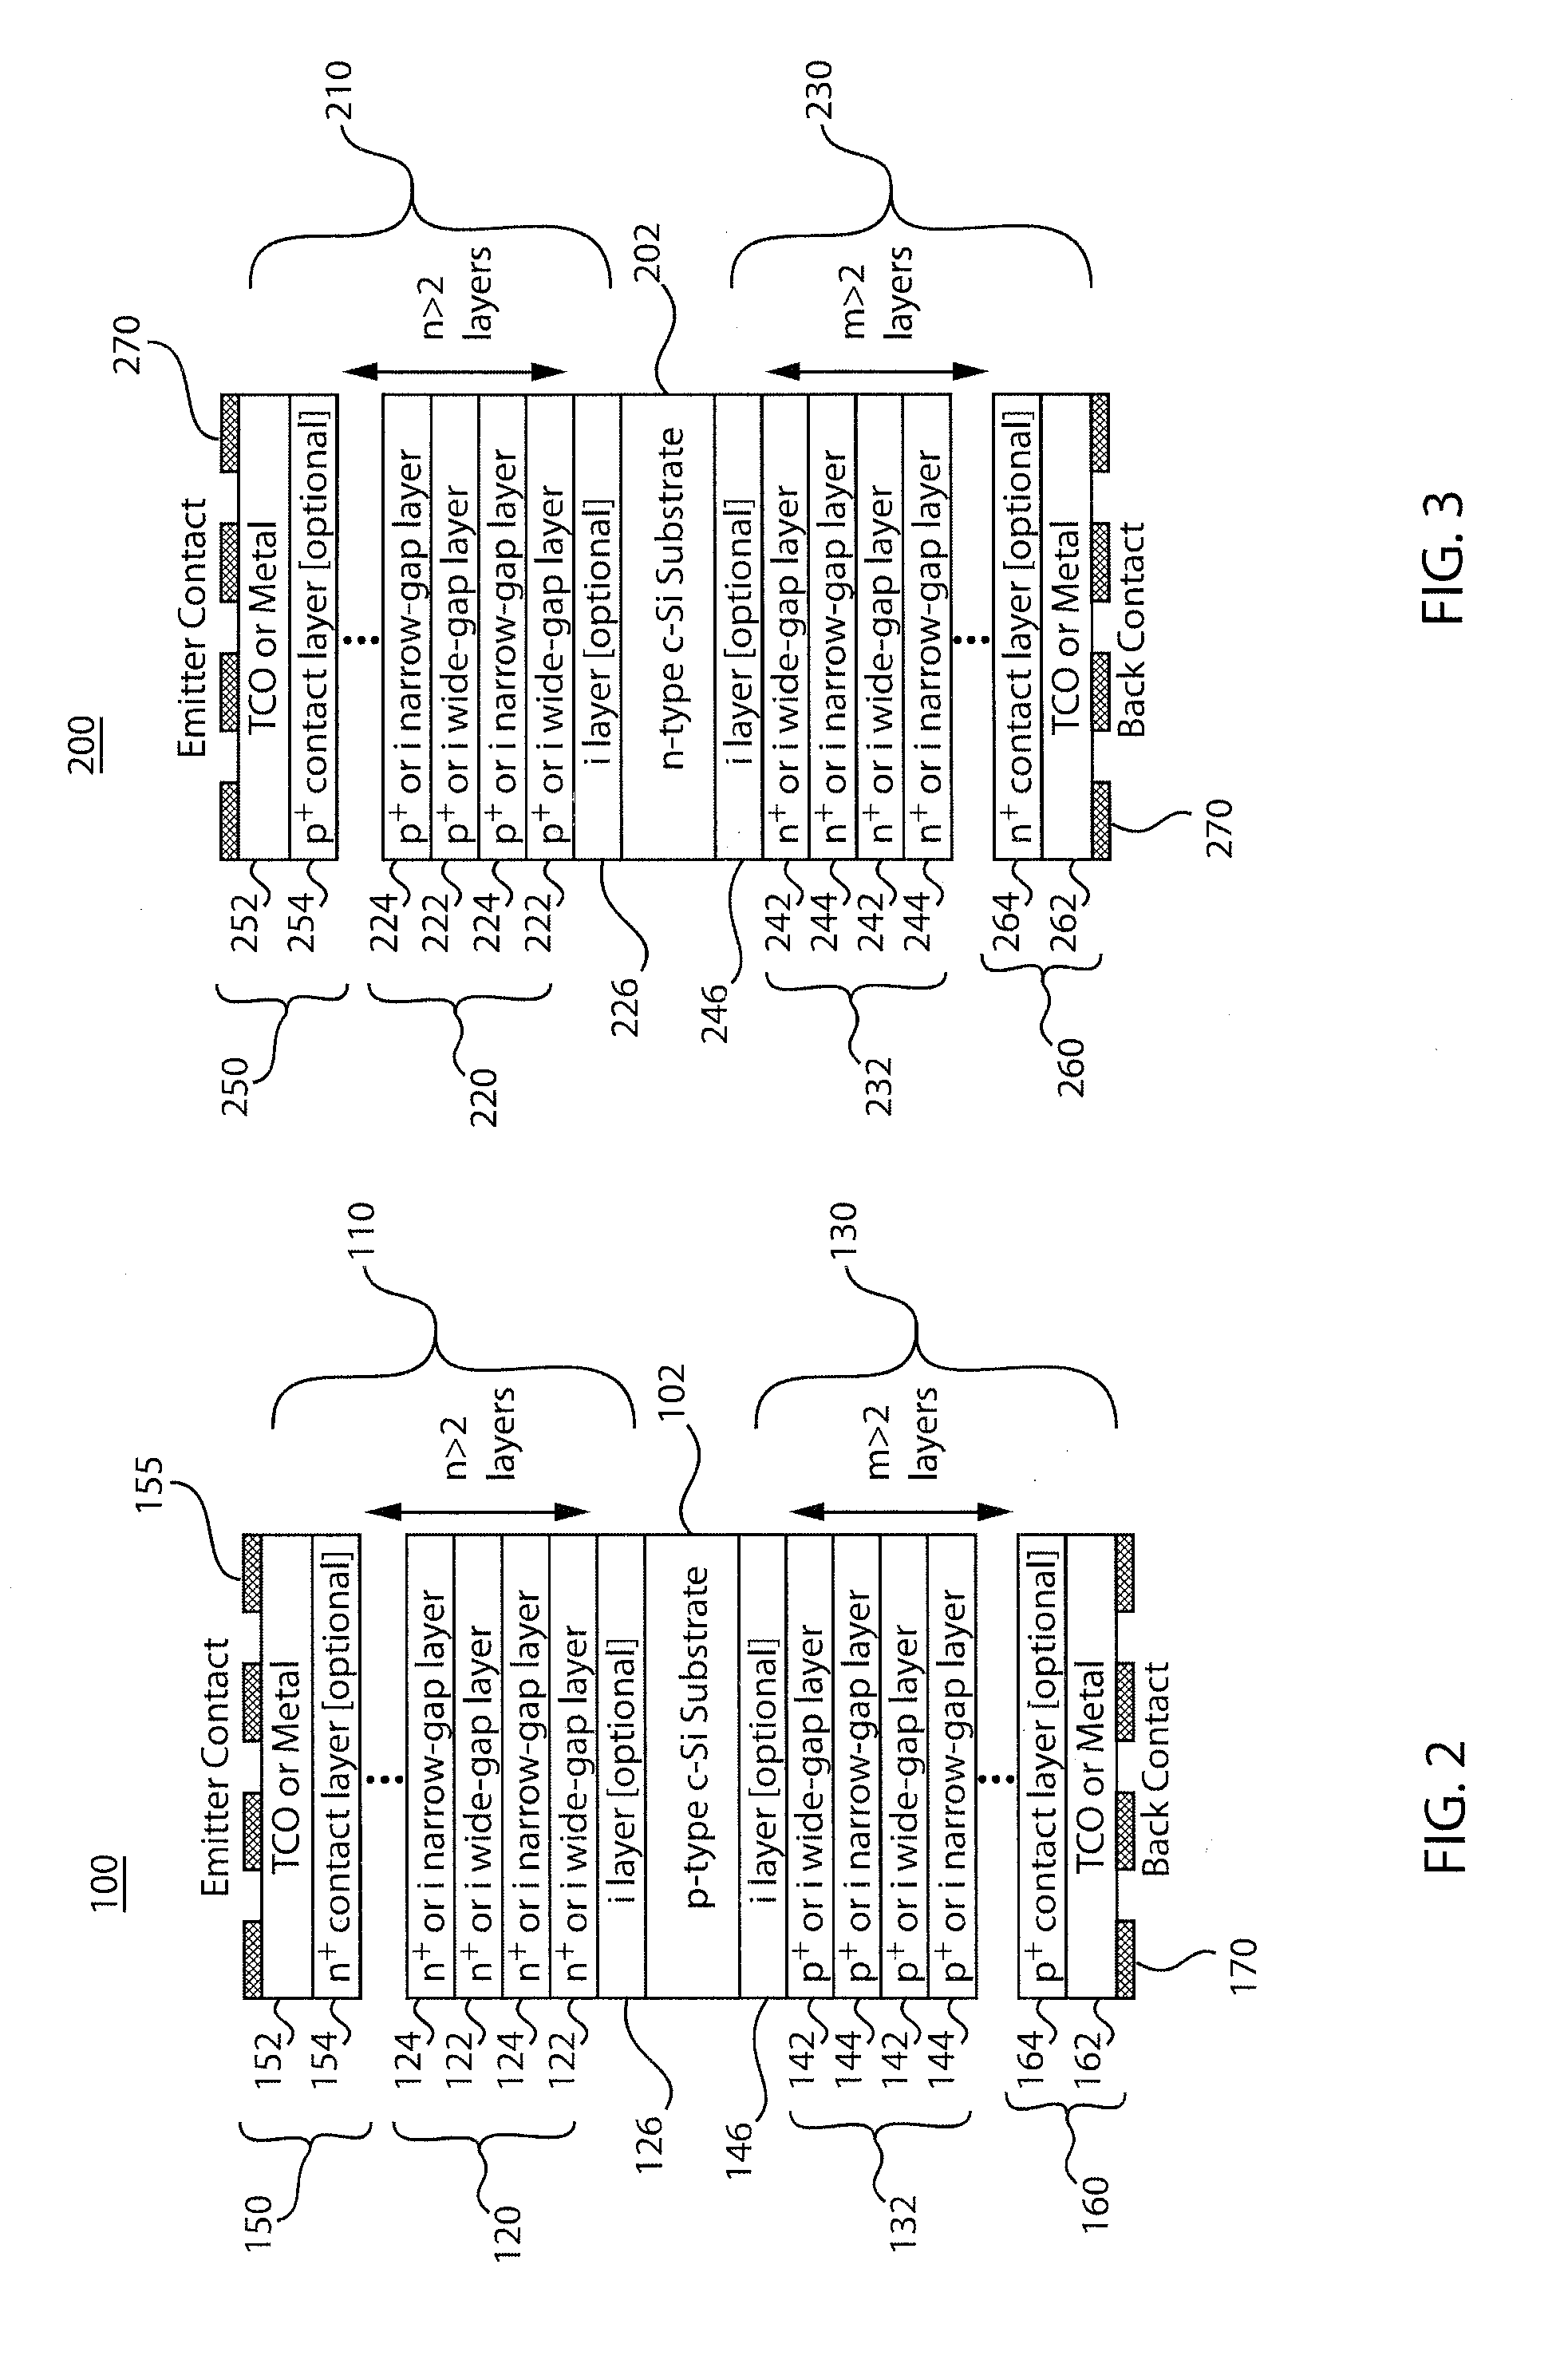 Contact for silicon heterojunction solar cells